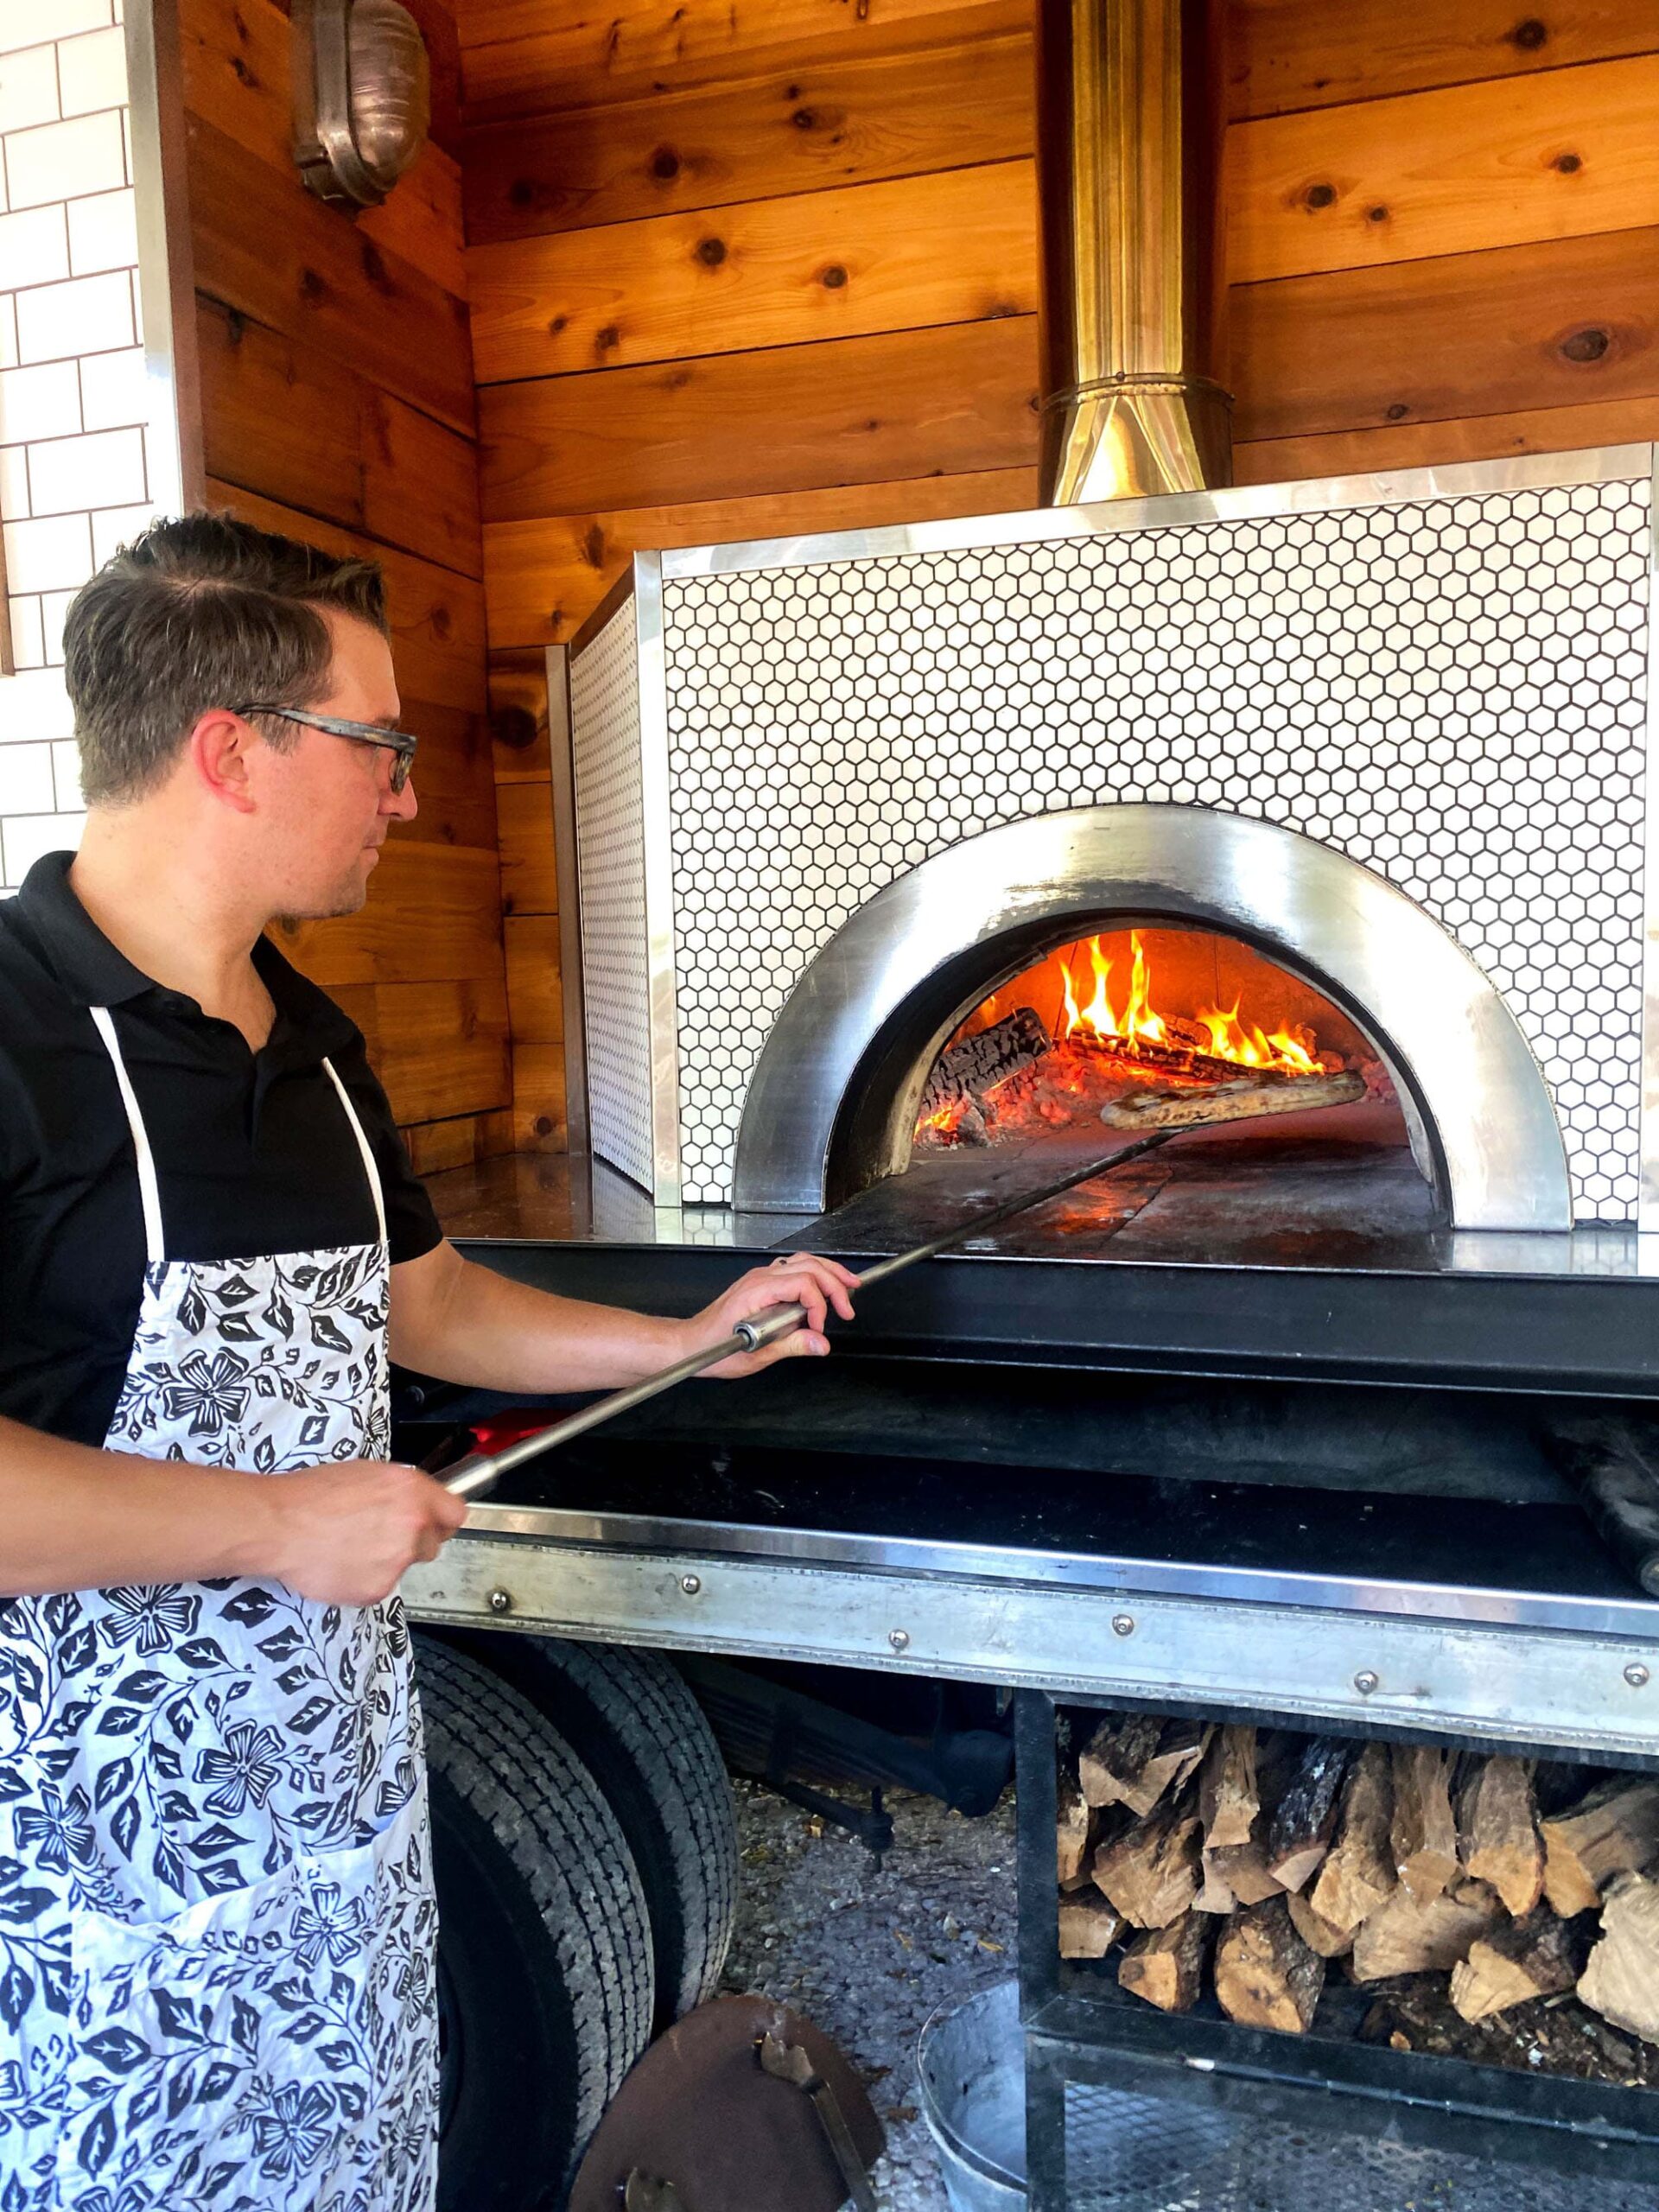 Rocky Shanower of Bahler Street pizza sliding a pizza into the wood fire oven.